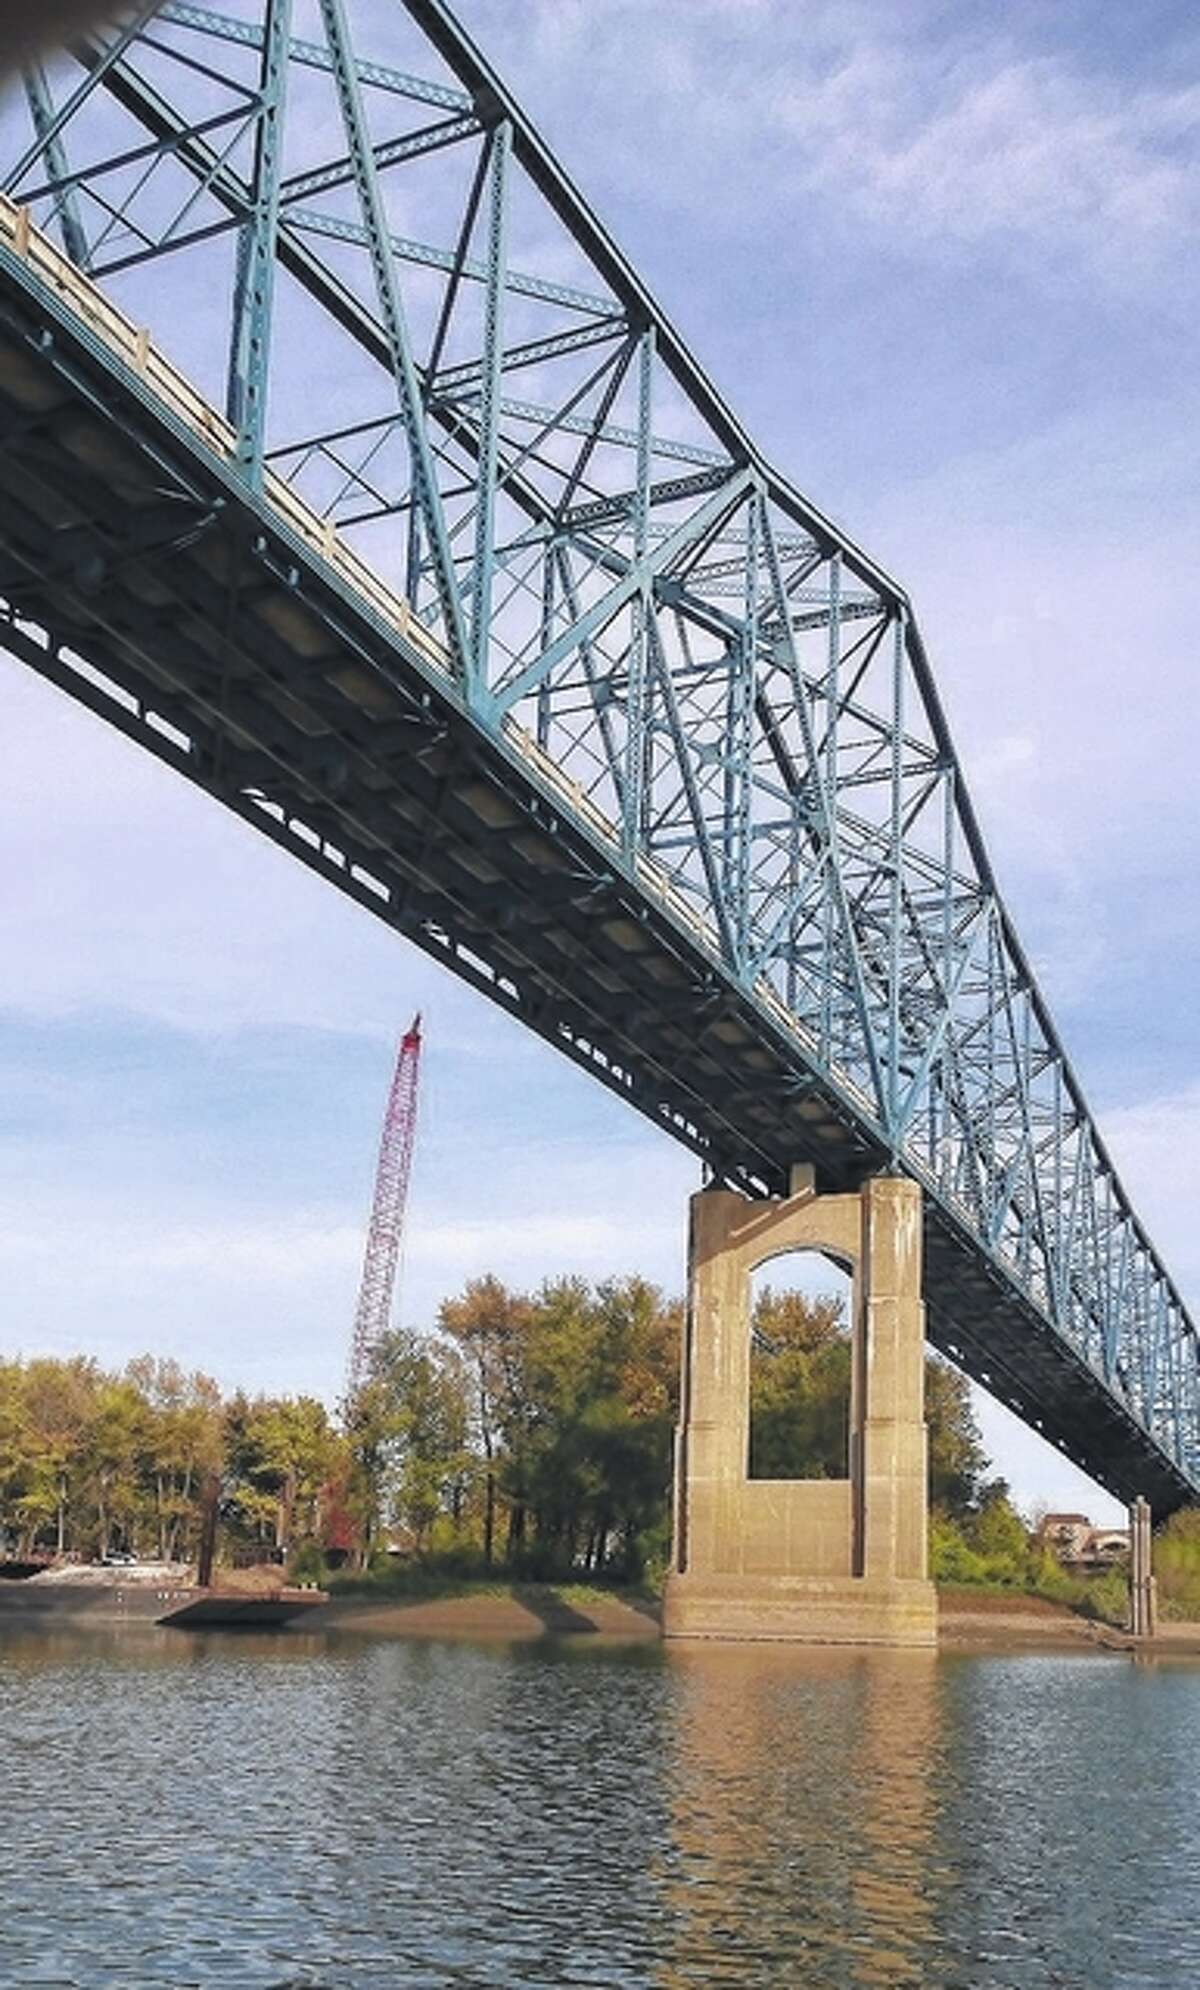 Photo courtesy of Jerry Stocker Construction is under way on the nine piers that will support the new Illinois Route 104 bridge over the Illinois River at Meredosia. The 1936 bridge, looming in the foreground, will be demolished once the new bridge is completed in fall 2018.